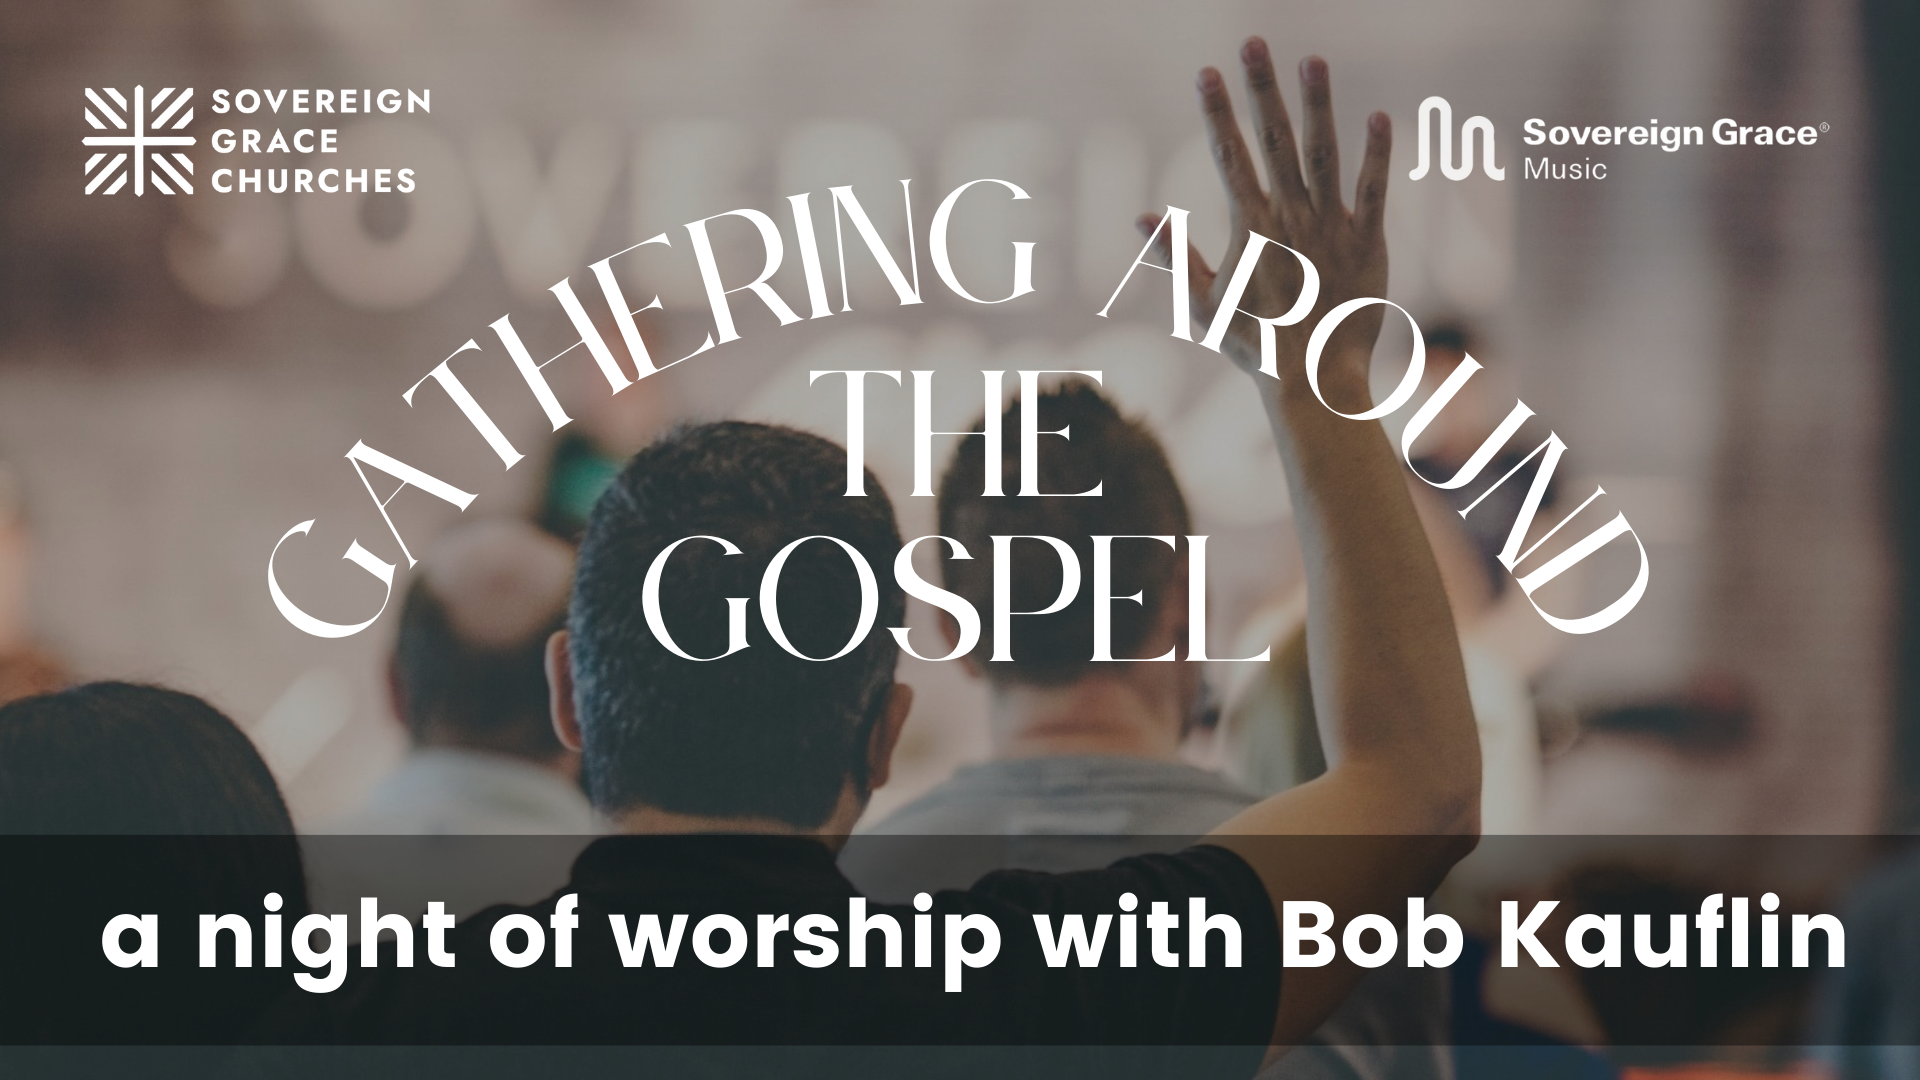 Copy of Gathering Around the Gospel Final-2.png